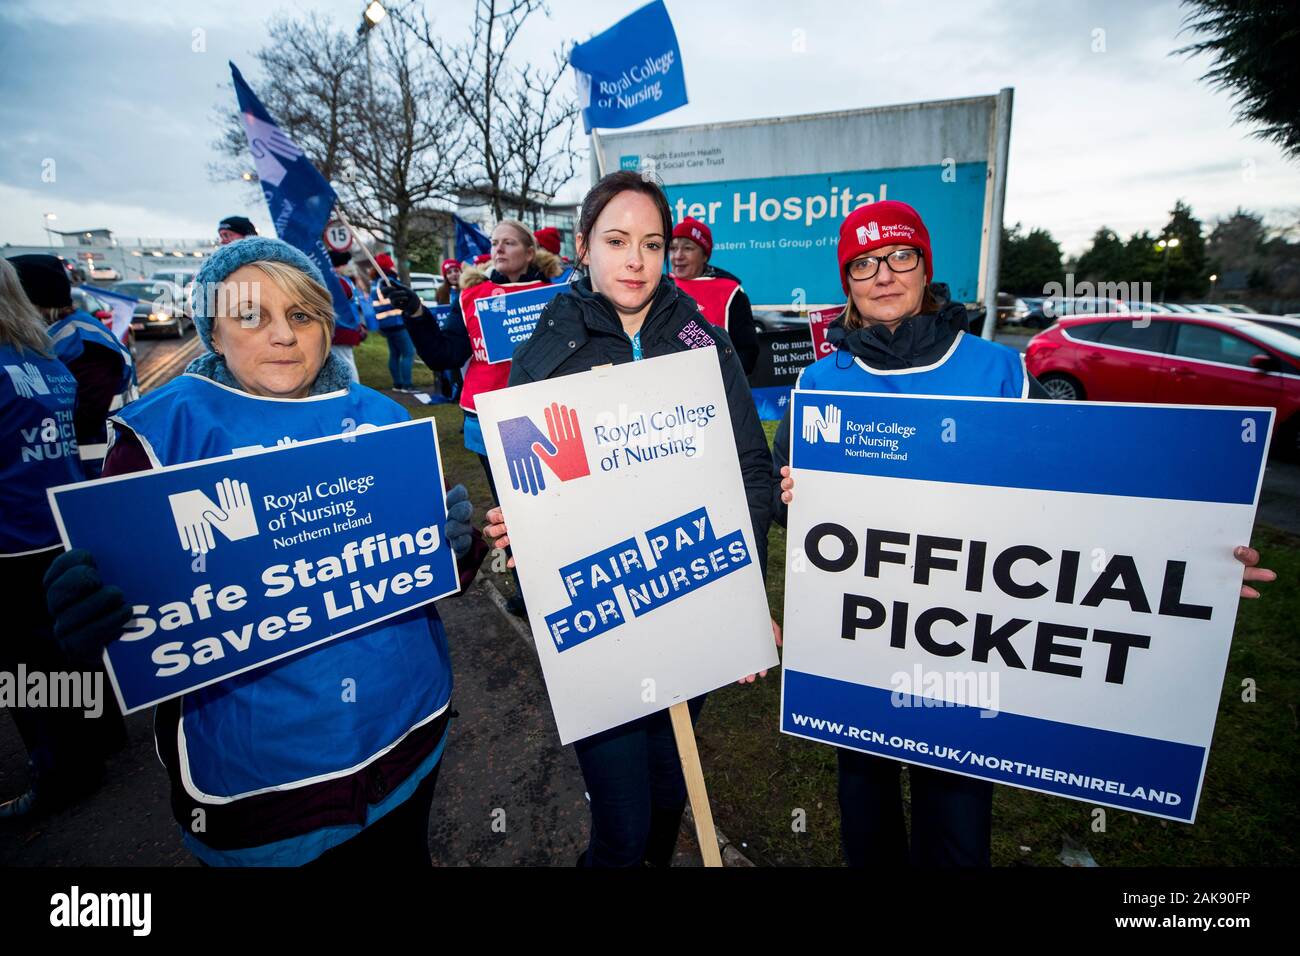 (left to right) Day of surgery nurses Alison Cromie, Andrea Kearns, and Nicola Kozak join the picket line at the Ulster Hospital, Dundonald, as thousands of nurses across Northern Ireland who have started another day of strike action in a row over pay. The protest follows a similar strike last month over salary rates that lag behind colleagues in Great Britain, and staff shortages. Stock Photo